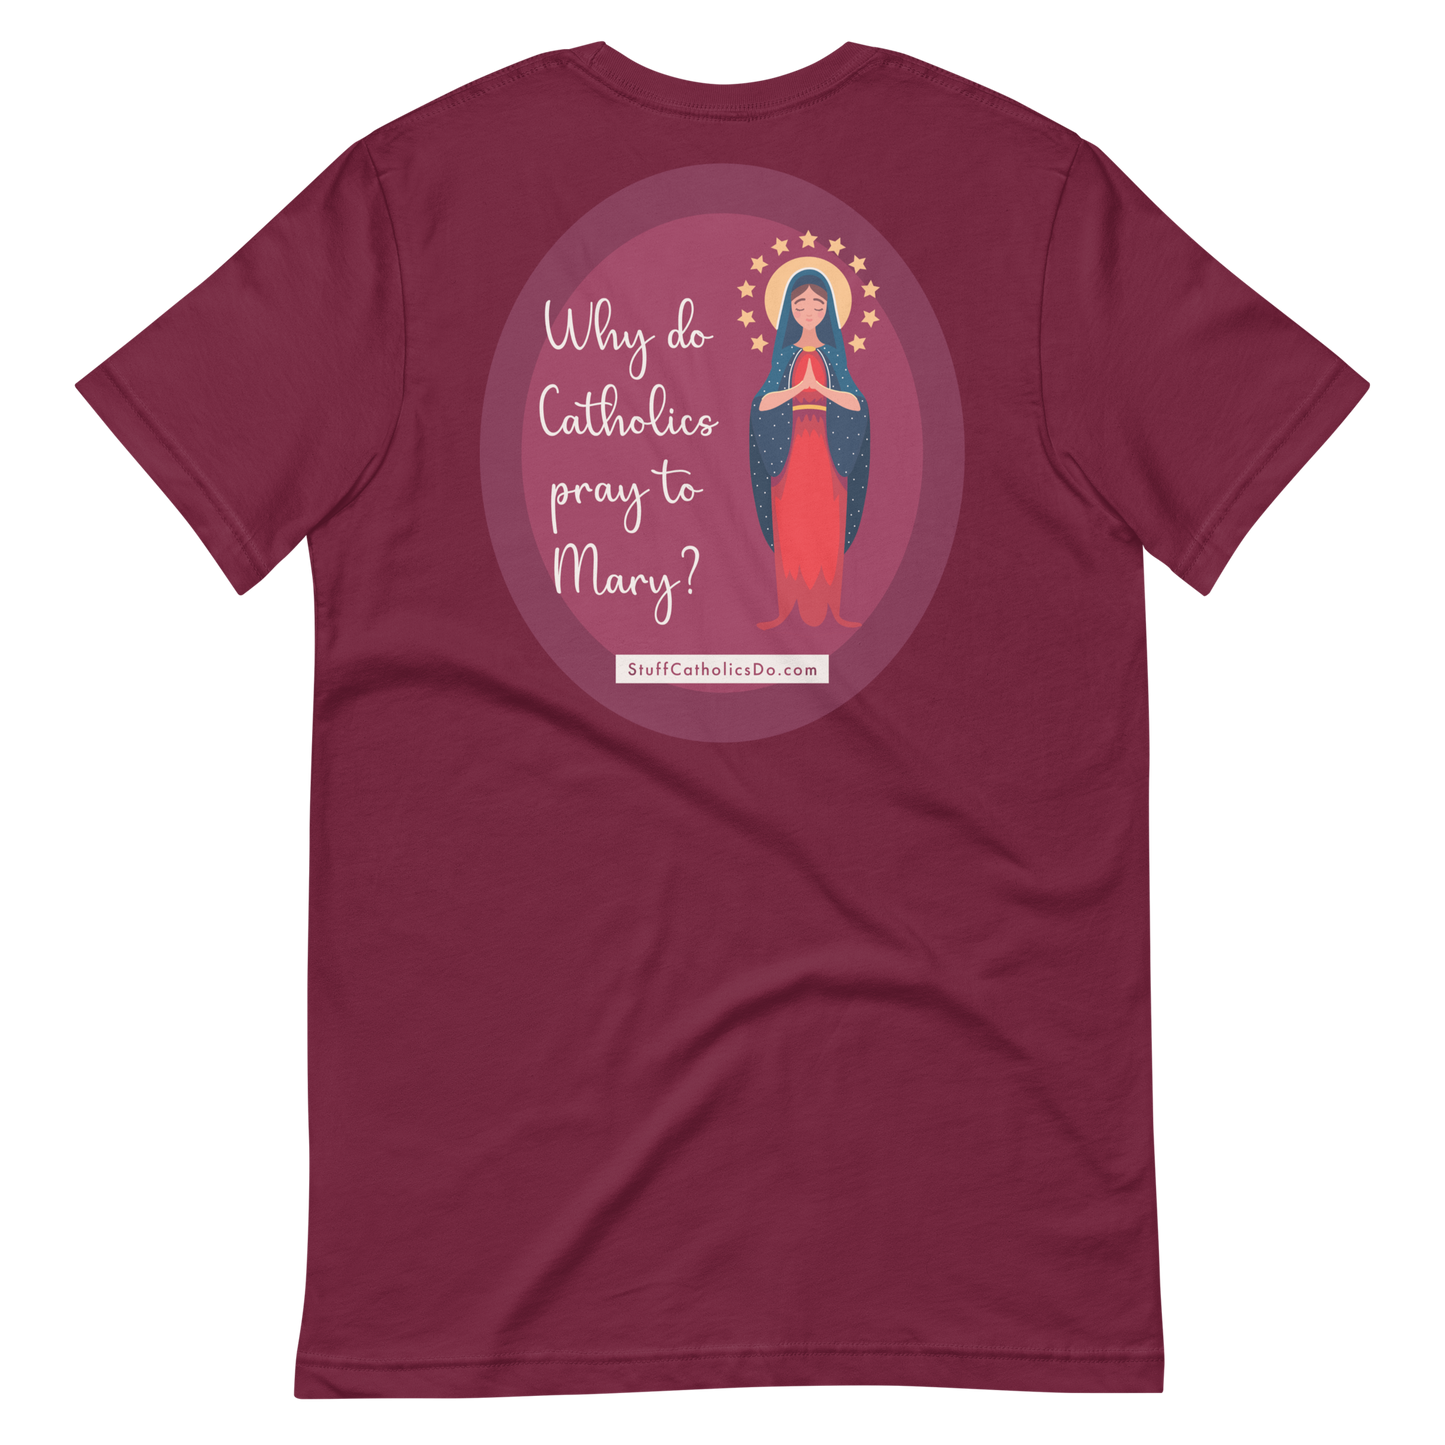 NEW "Why Do Catholics Pray To Mary?" T-Shirt - Front and Back